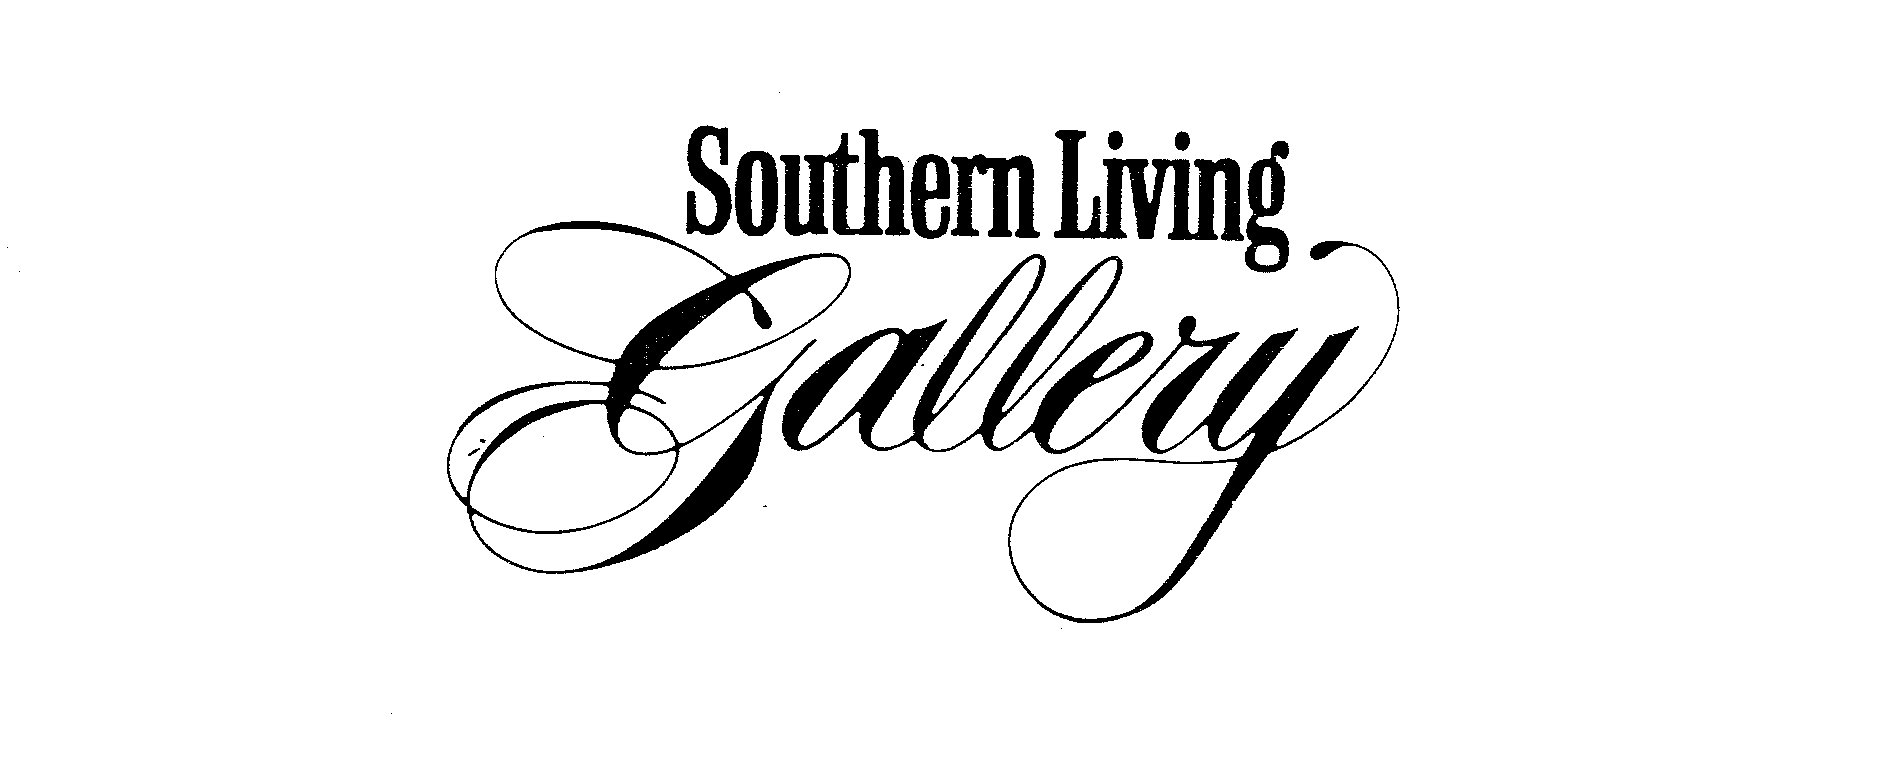  SOUTHERN LIVING GALLERY